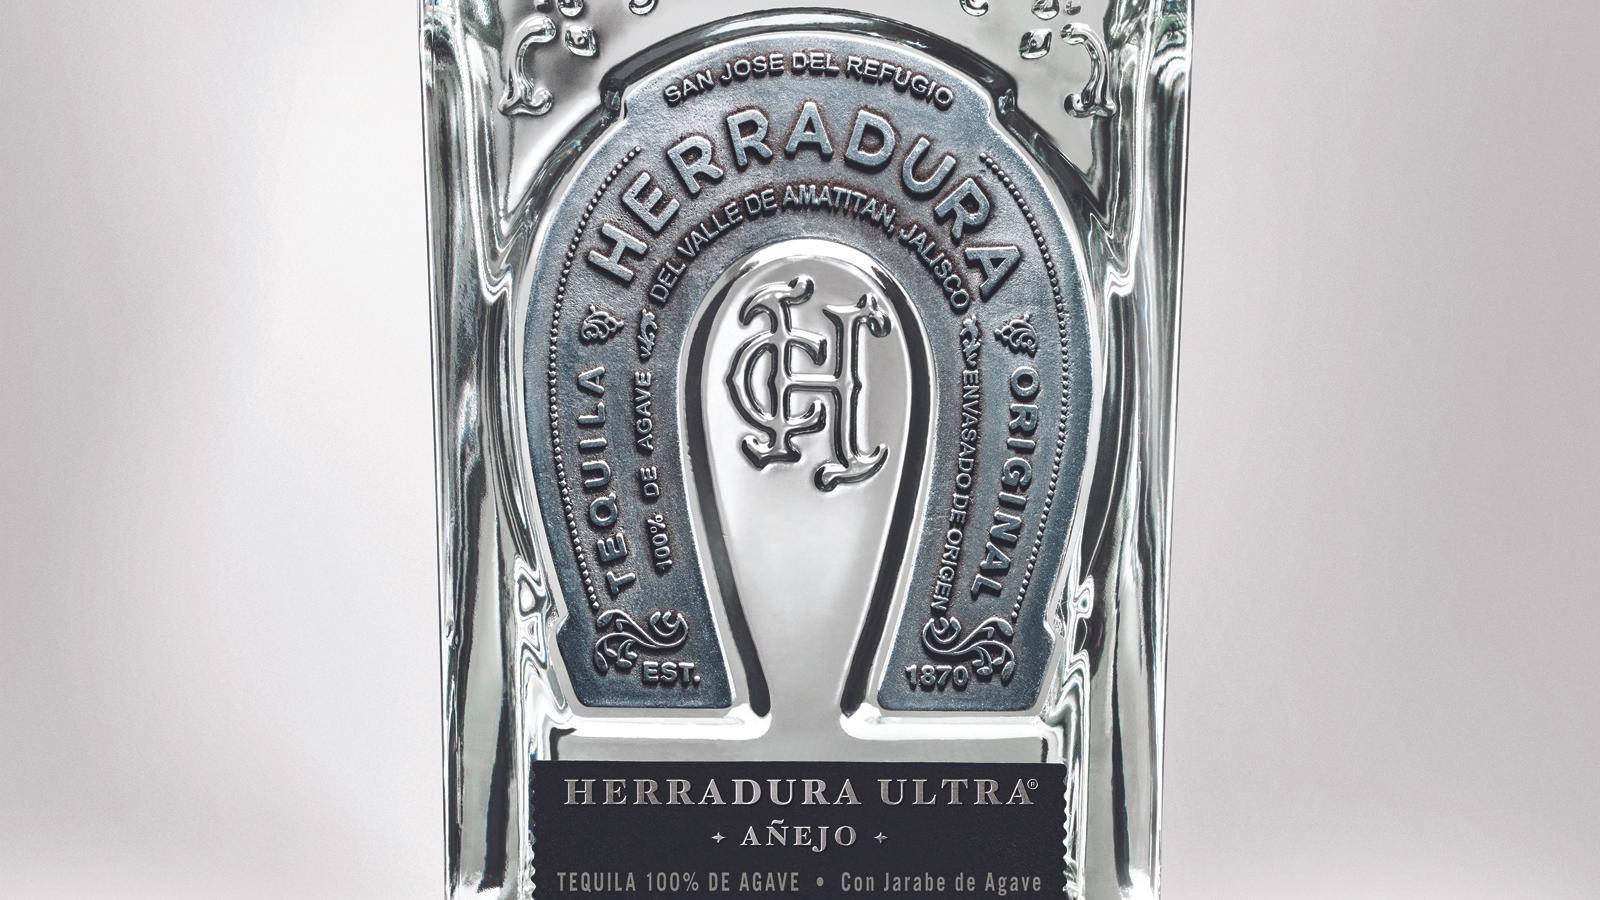 Herraduraultra Anejo Tequila Is A Brand Of Tequila Known For Its Superior Quality And Smooth Taste. Wallpaper